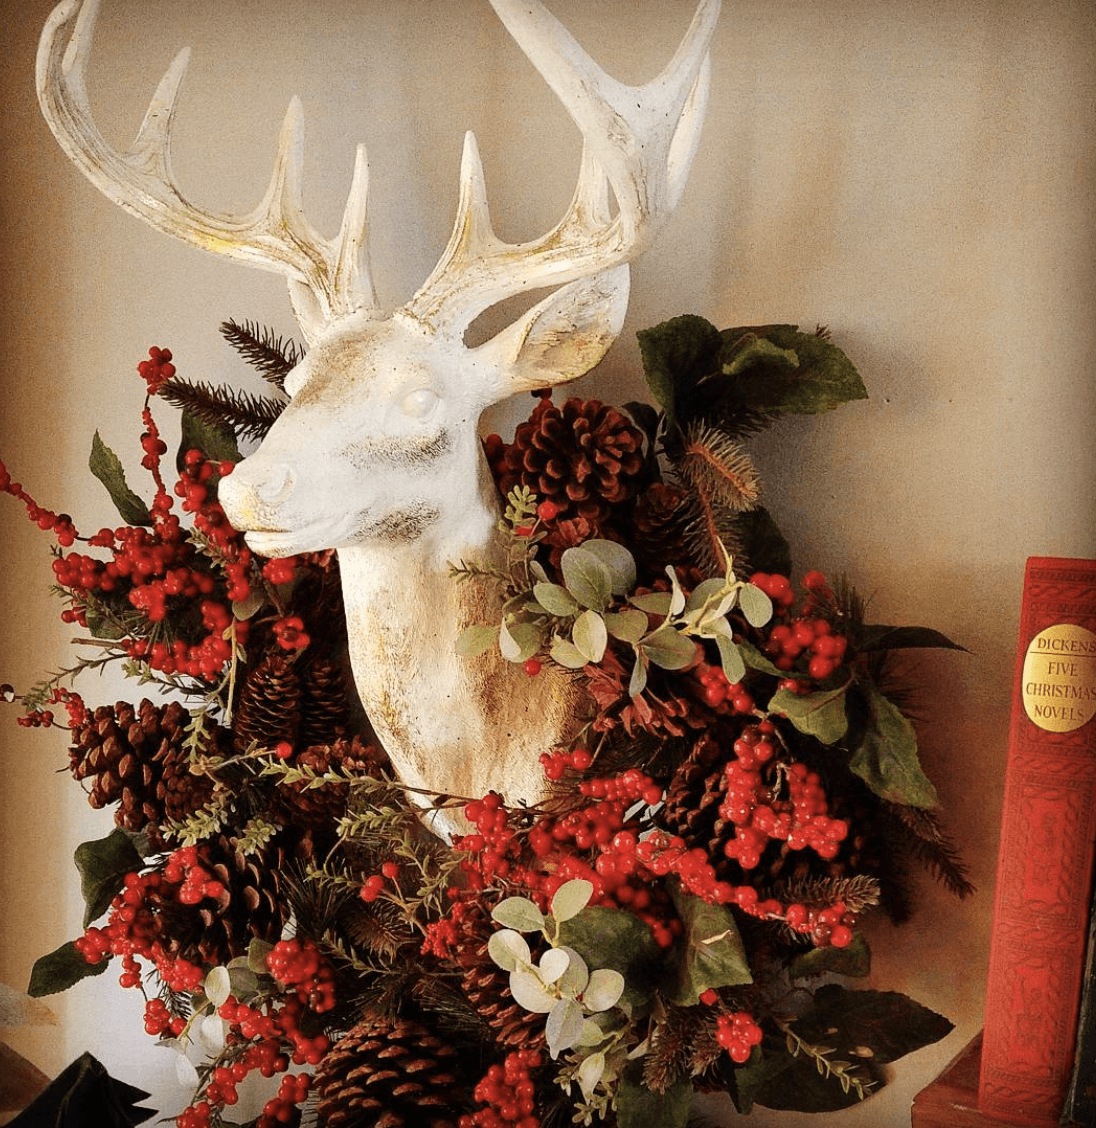 red berry pinecone wreath hanging around a white deer head